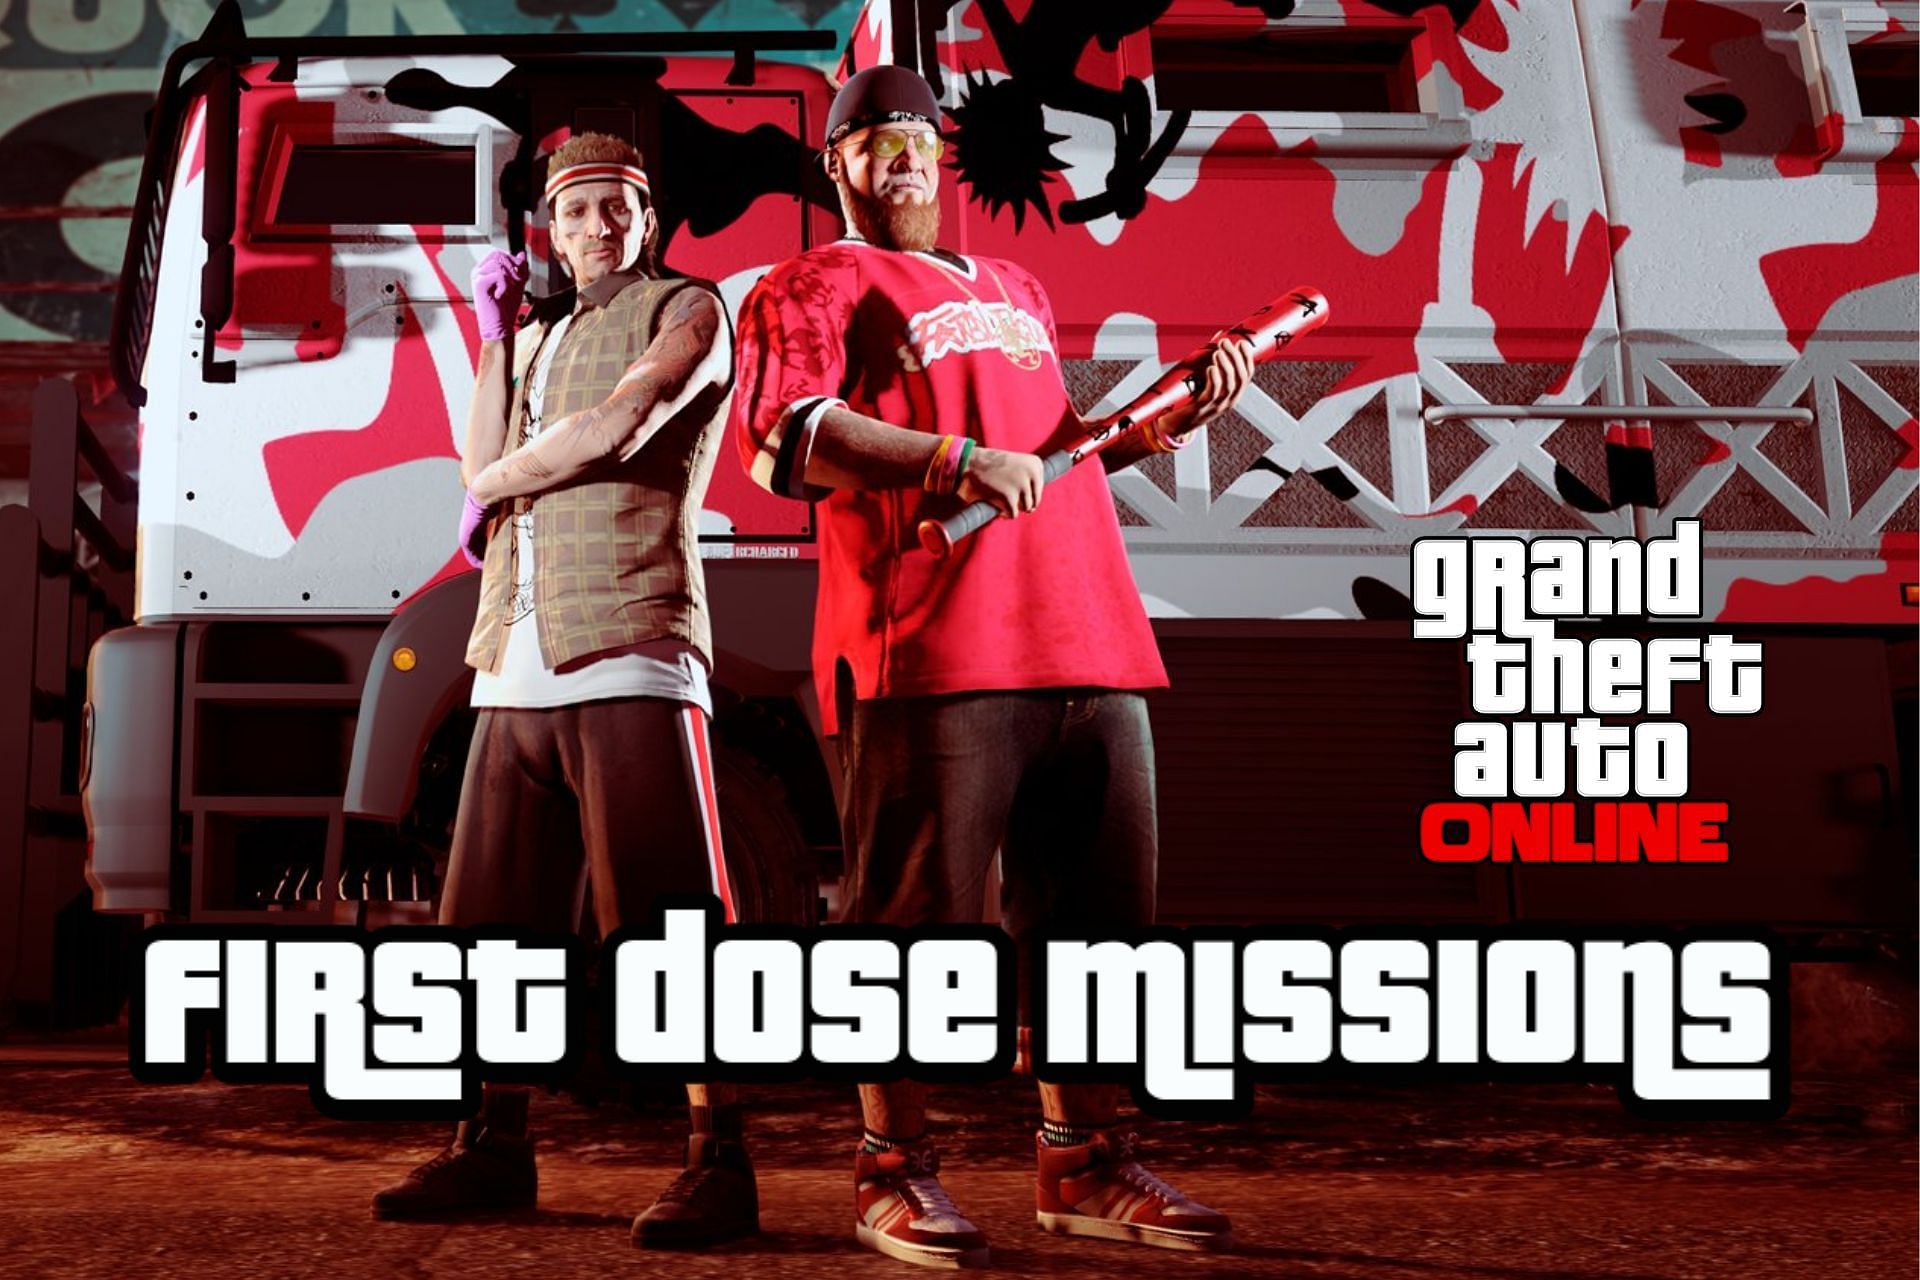 Rockstar has announced the First Dose mission series in GTA Online (Image via Rockstar Games)